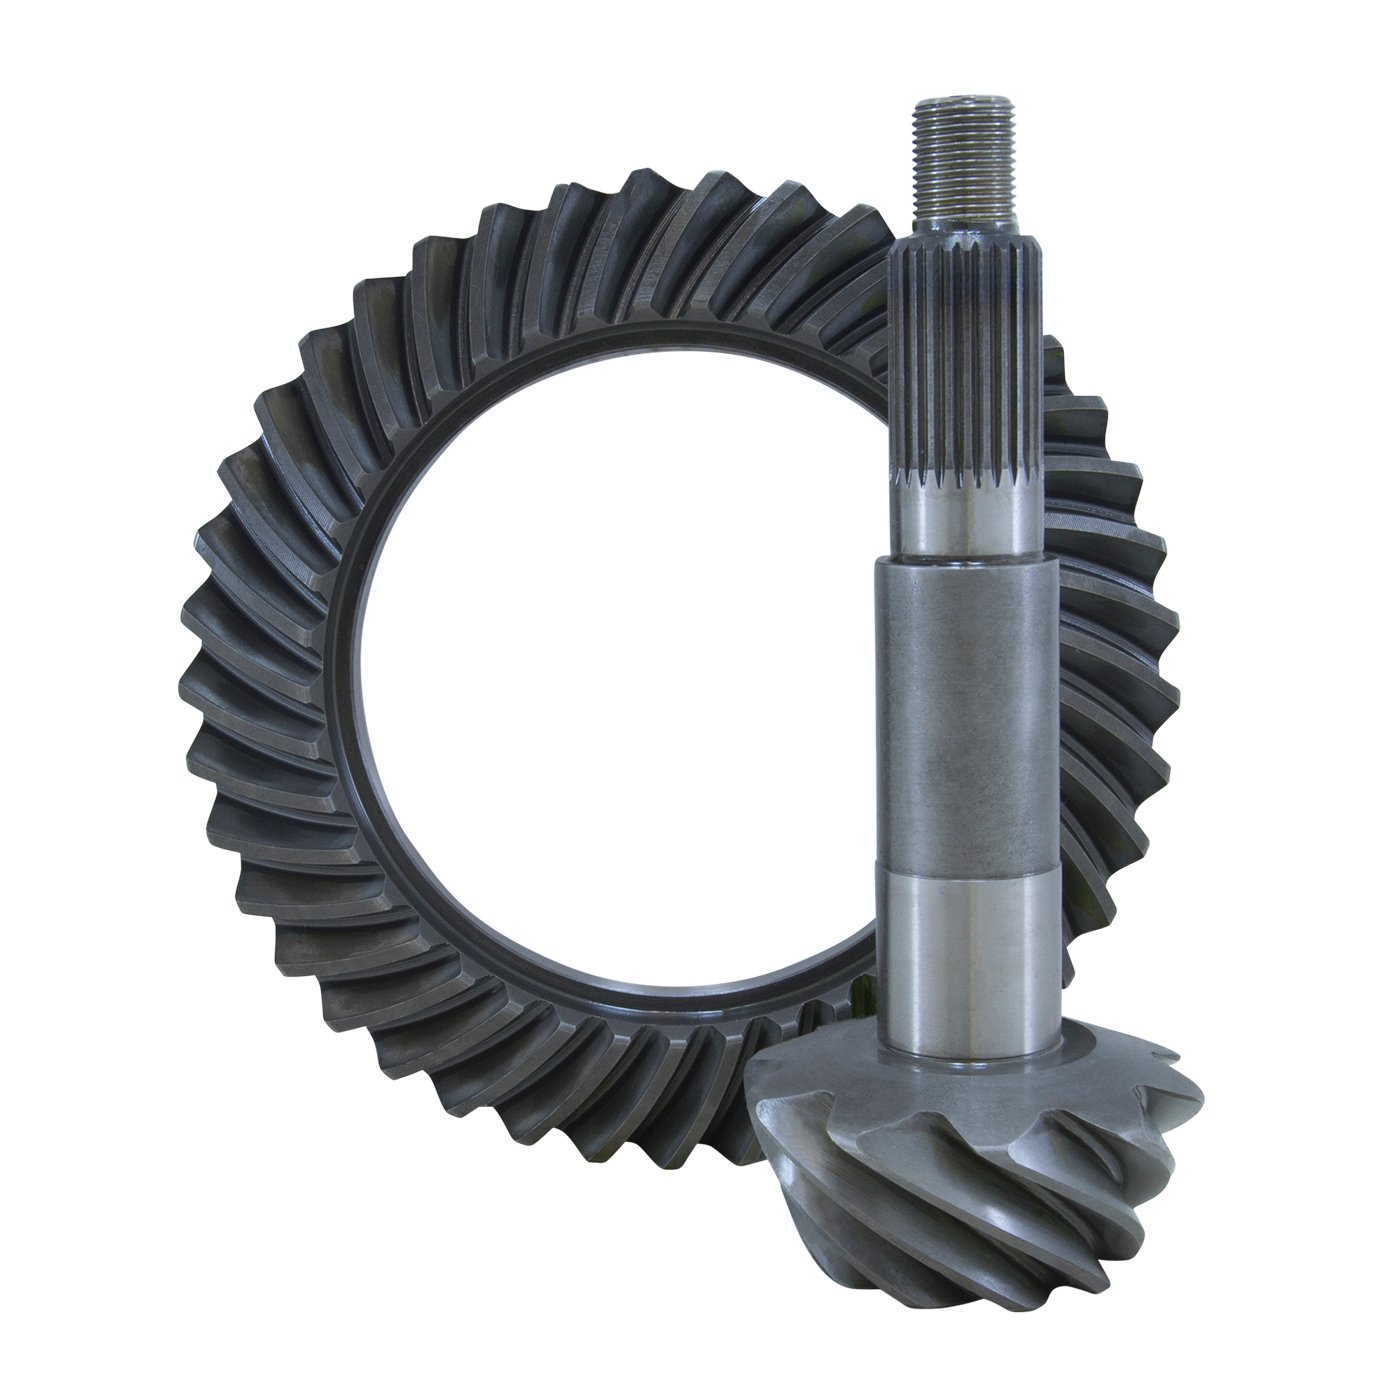 USA Standard ZG D44-456T Replacement Ring & Pinion Gear Set (Thick), For Dana 44, 4.56 Ratio